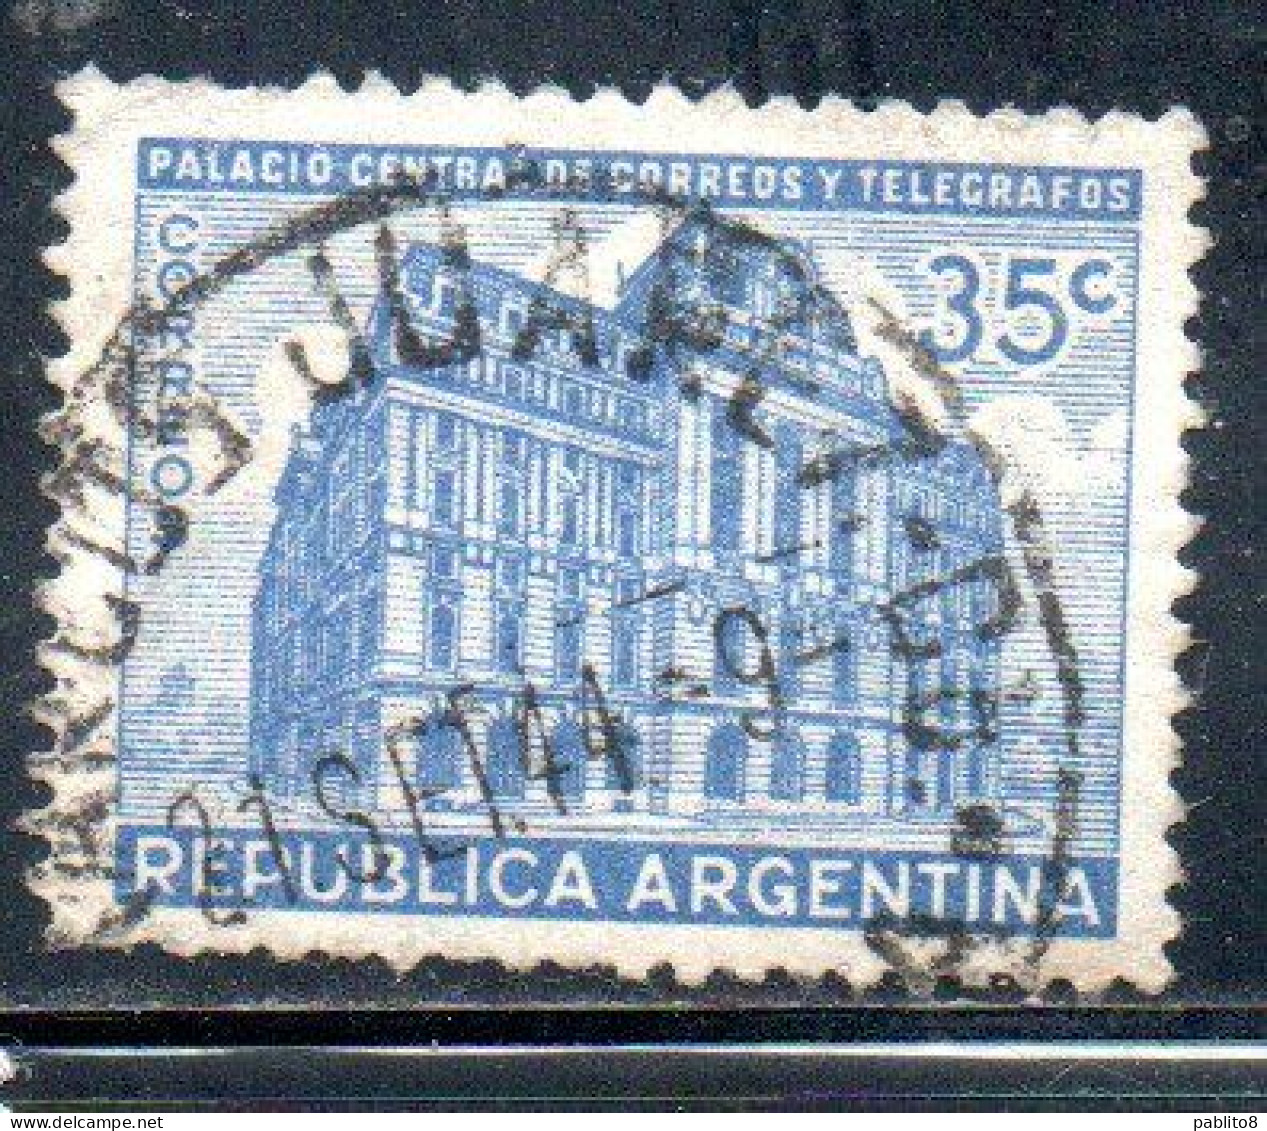 ARGENTINA 1942 POST OFFICE BUENOS AIRES 35c  USED USADO OBLITERE' - Usati